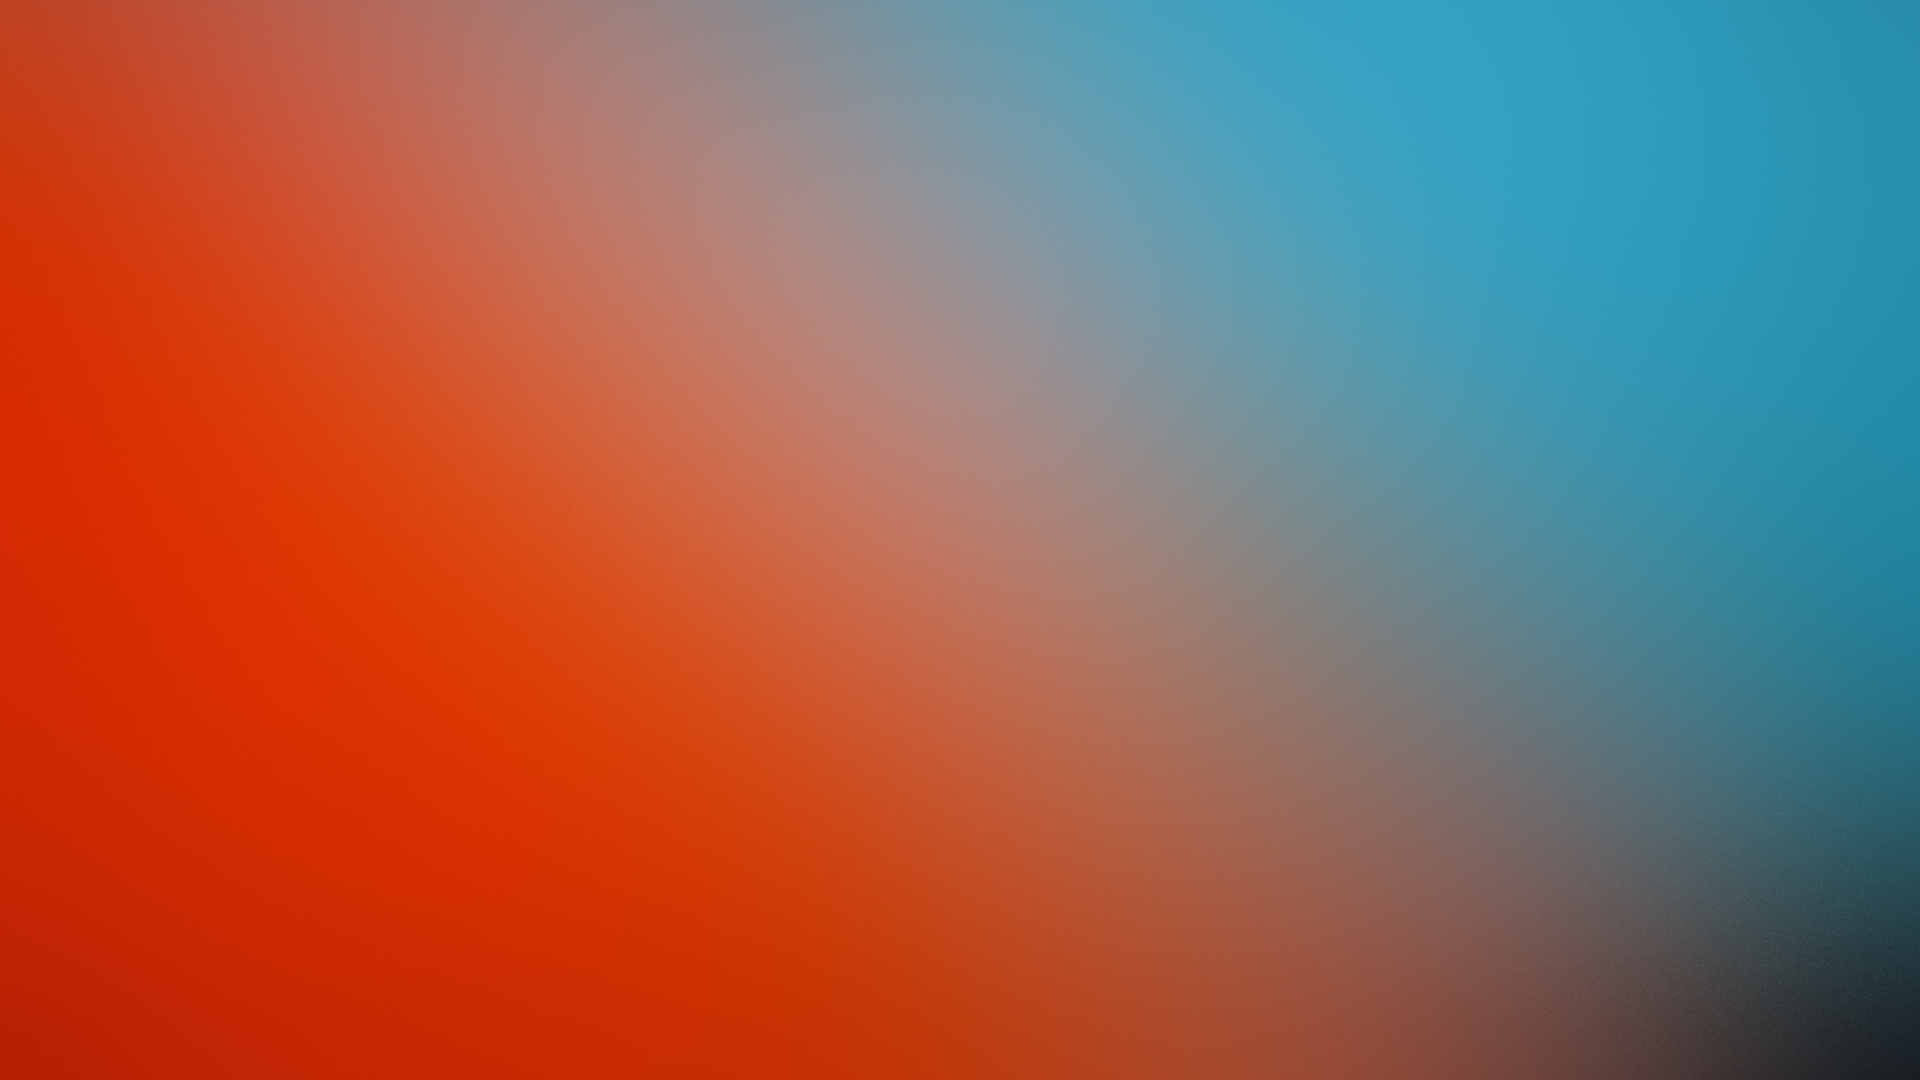 1440x2992 Orange And Blue Fire And Ice Gradient 1440x2992 Resolution Wallpaper Hd Minimalist 4k Wallpapers Images Photos And Background